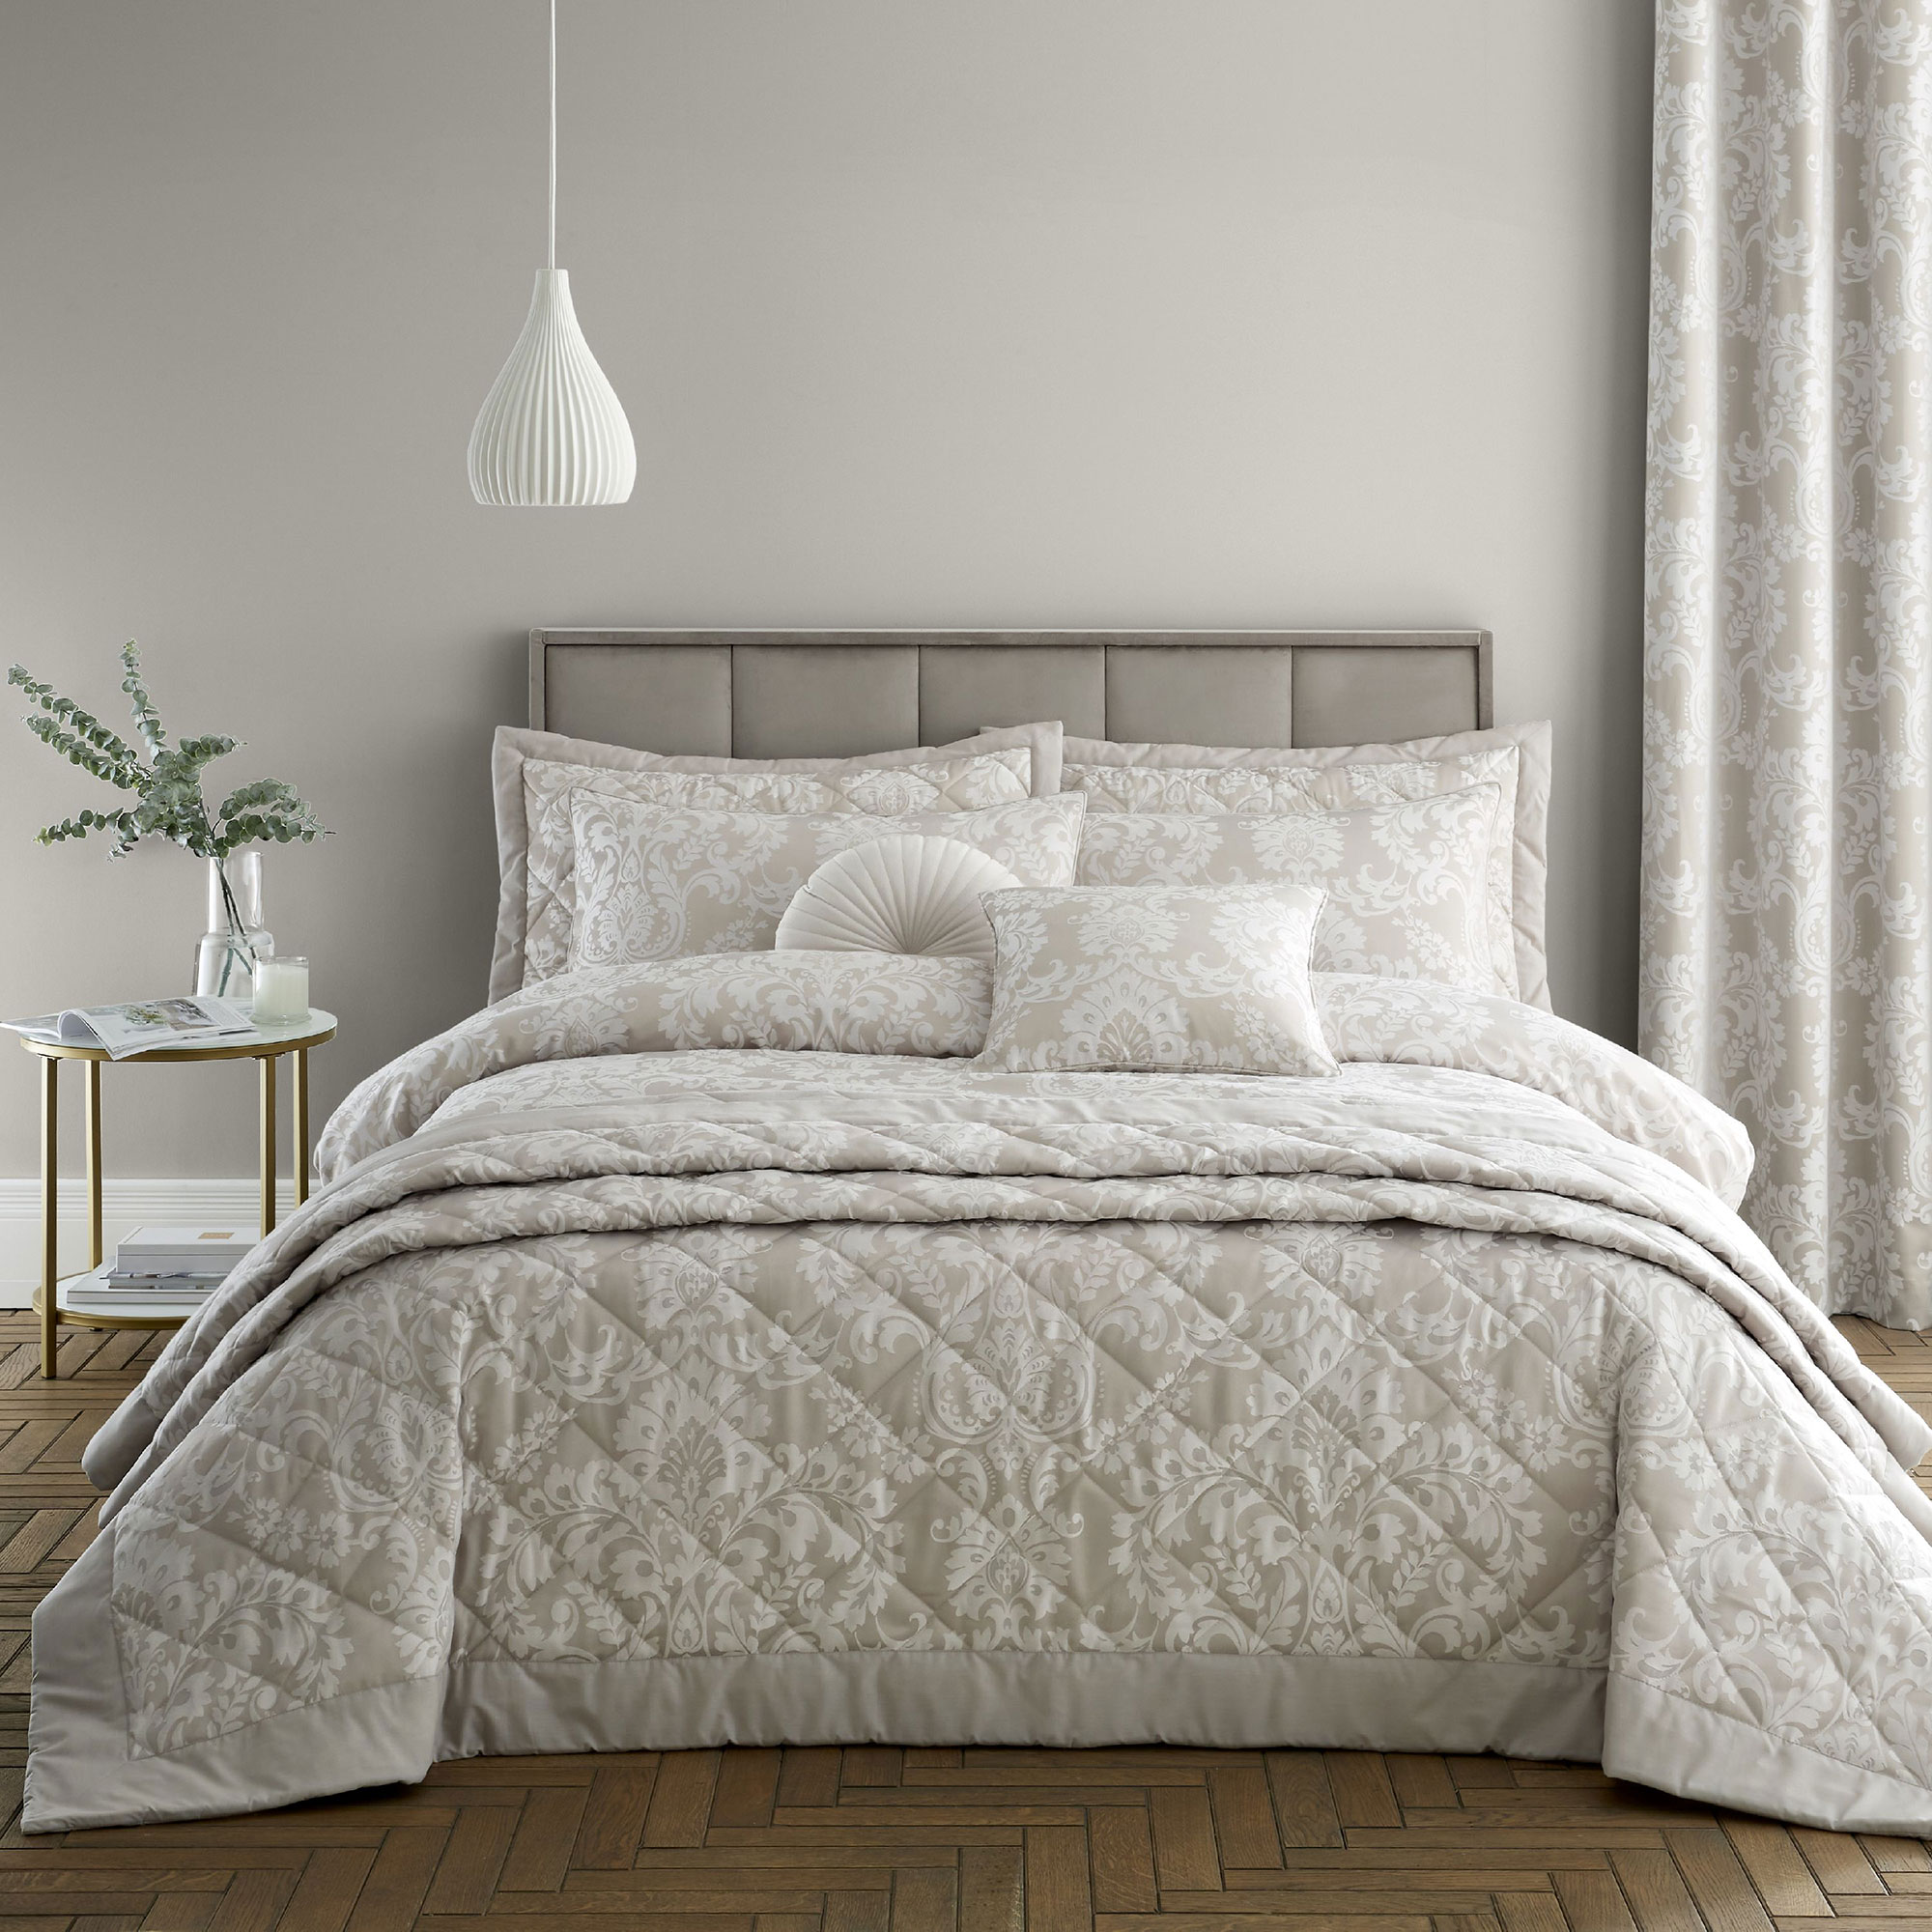 Catherine Lansfield Bedding Catherine Lansfield Classic Damask Bedspread  Natural - Throws & Bedspreads - Fishpools